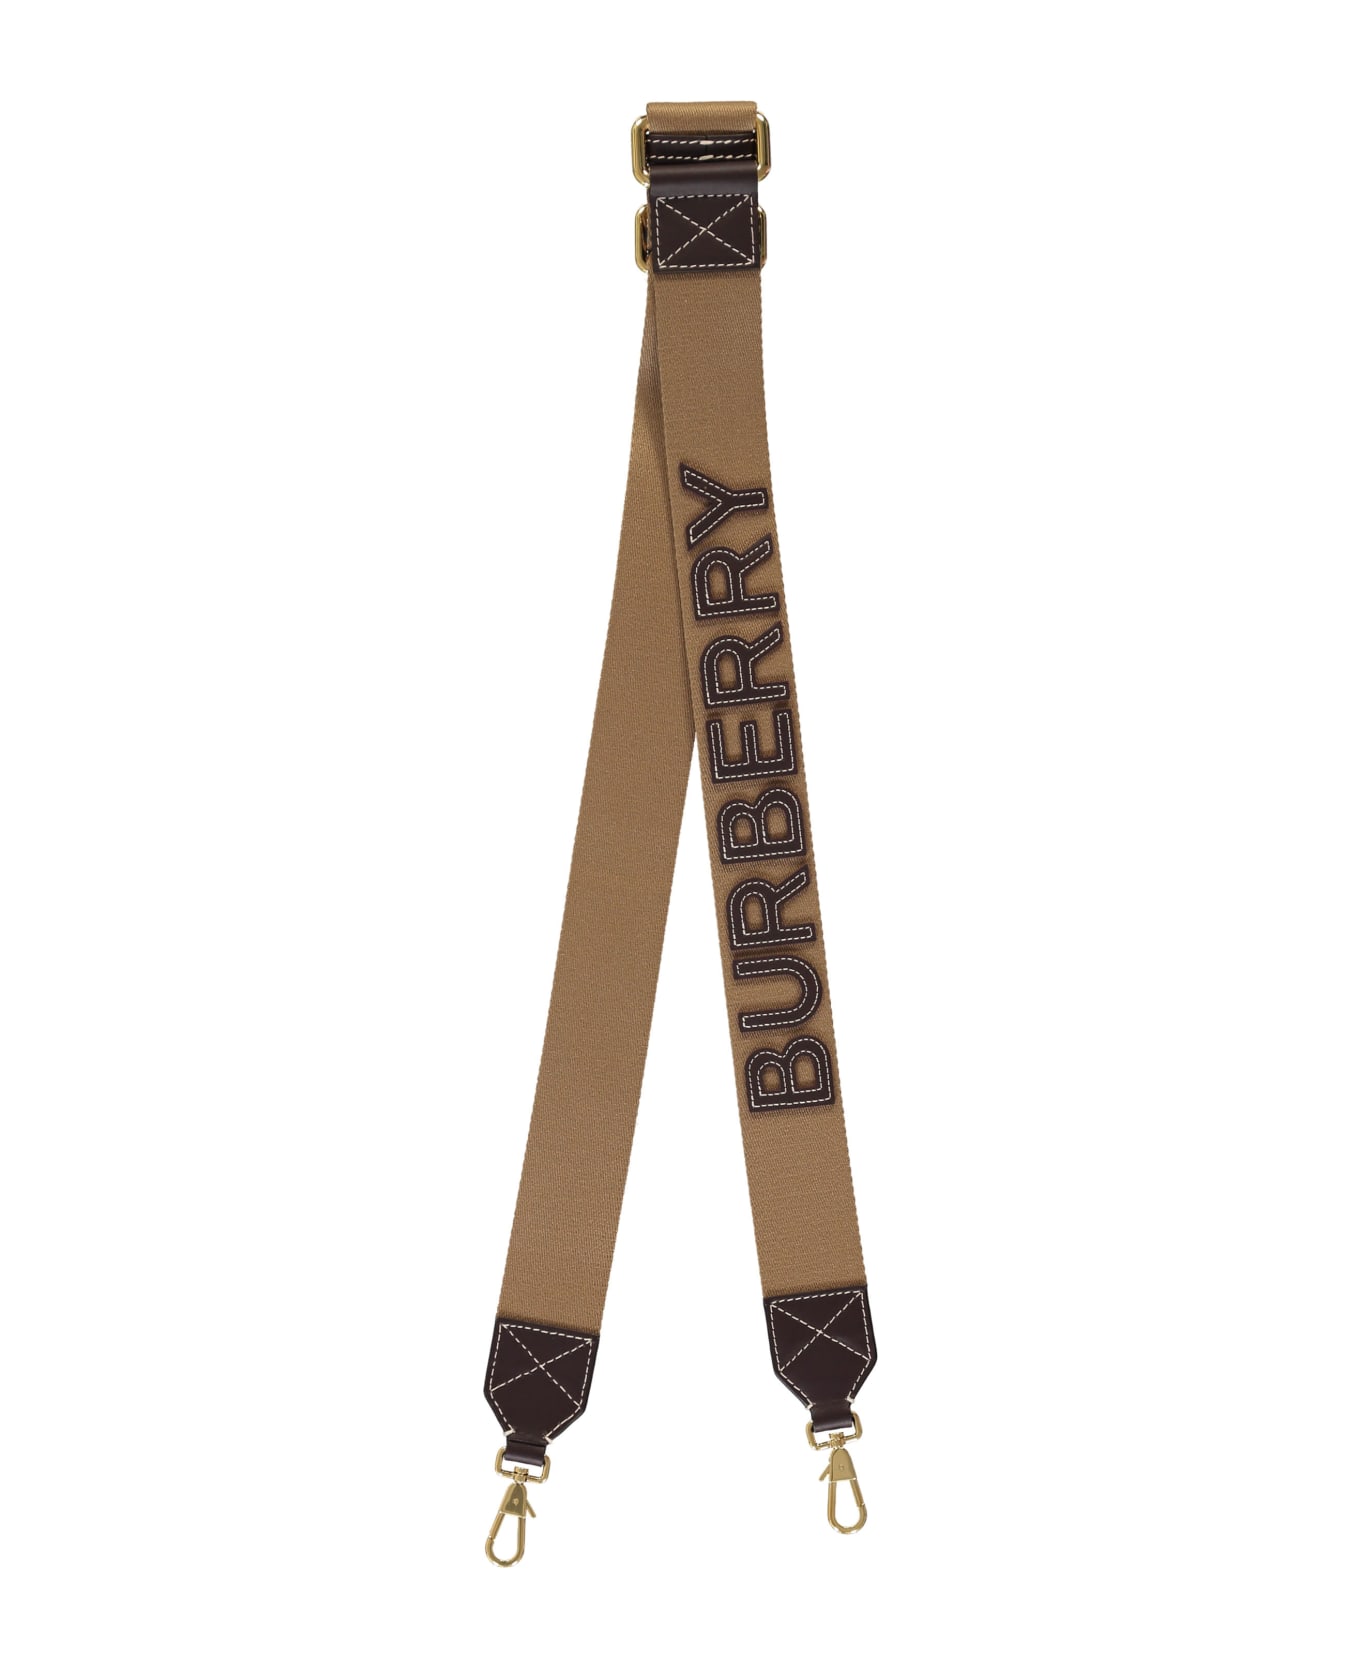 Burberry Adjustable And Removable Fabric Shoulder Strap - brown